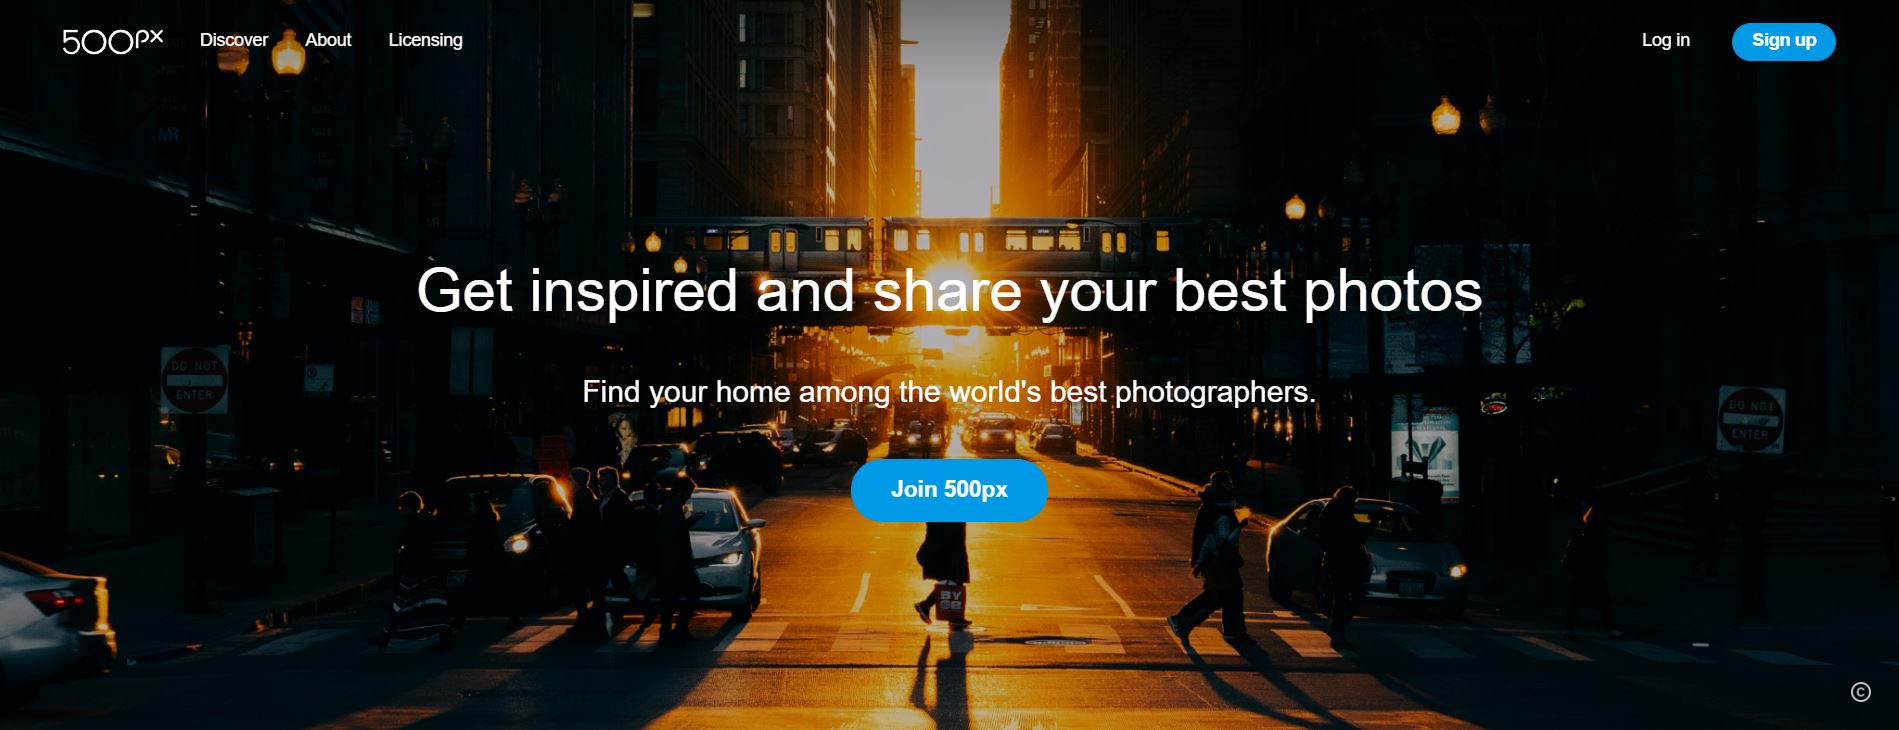 Seriously, Is 500px Still Even Relevant to the Photography Community?